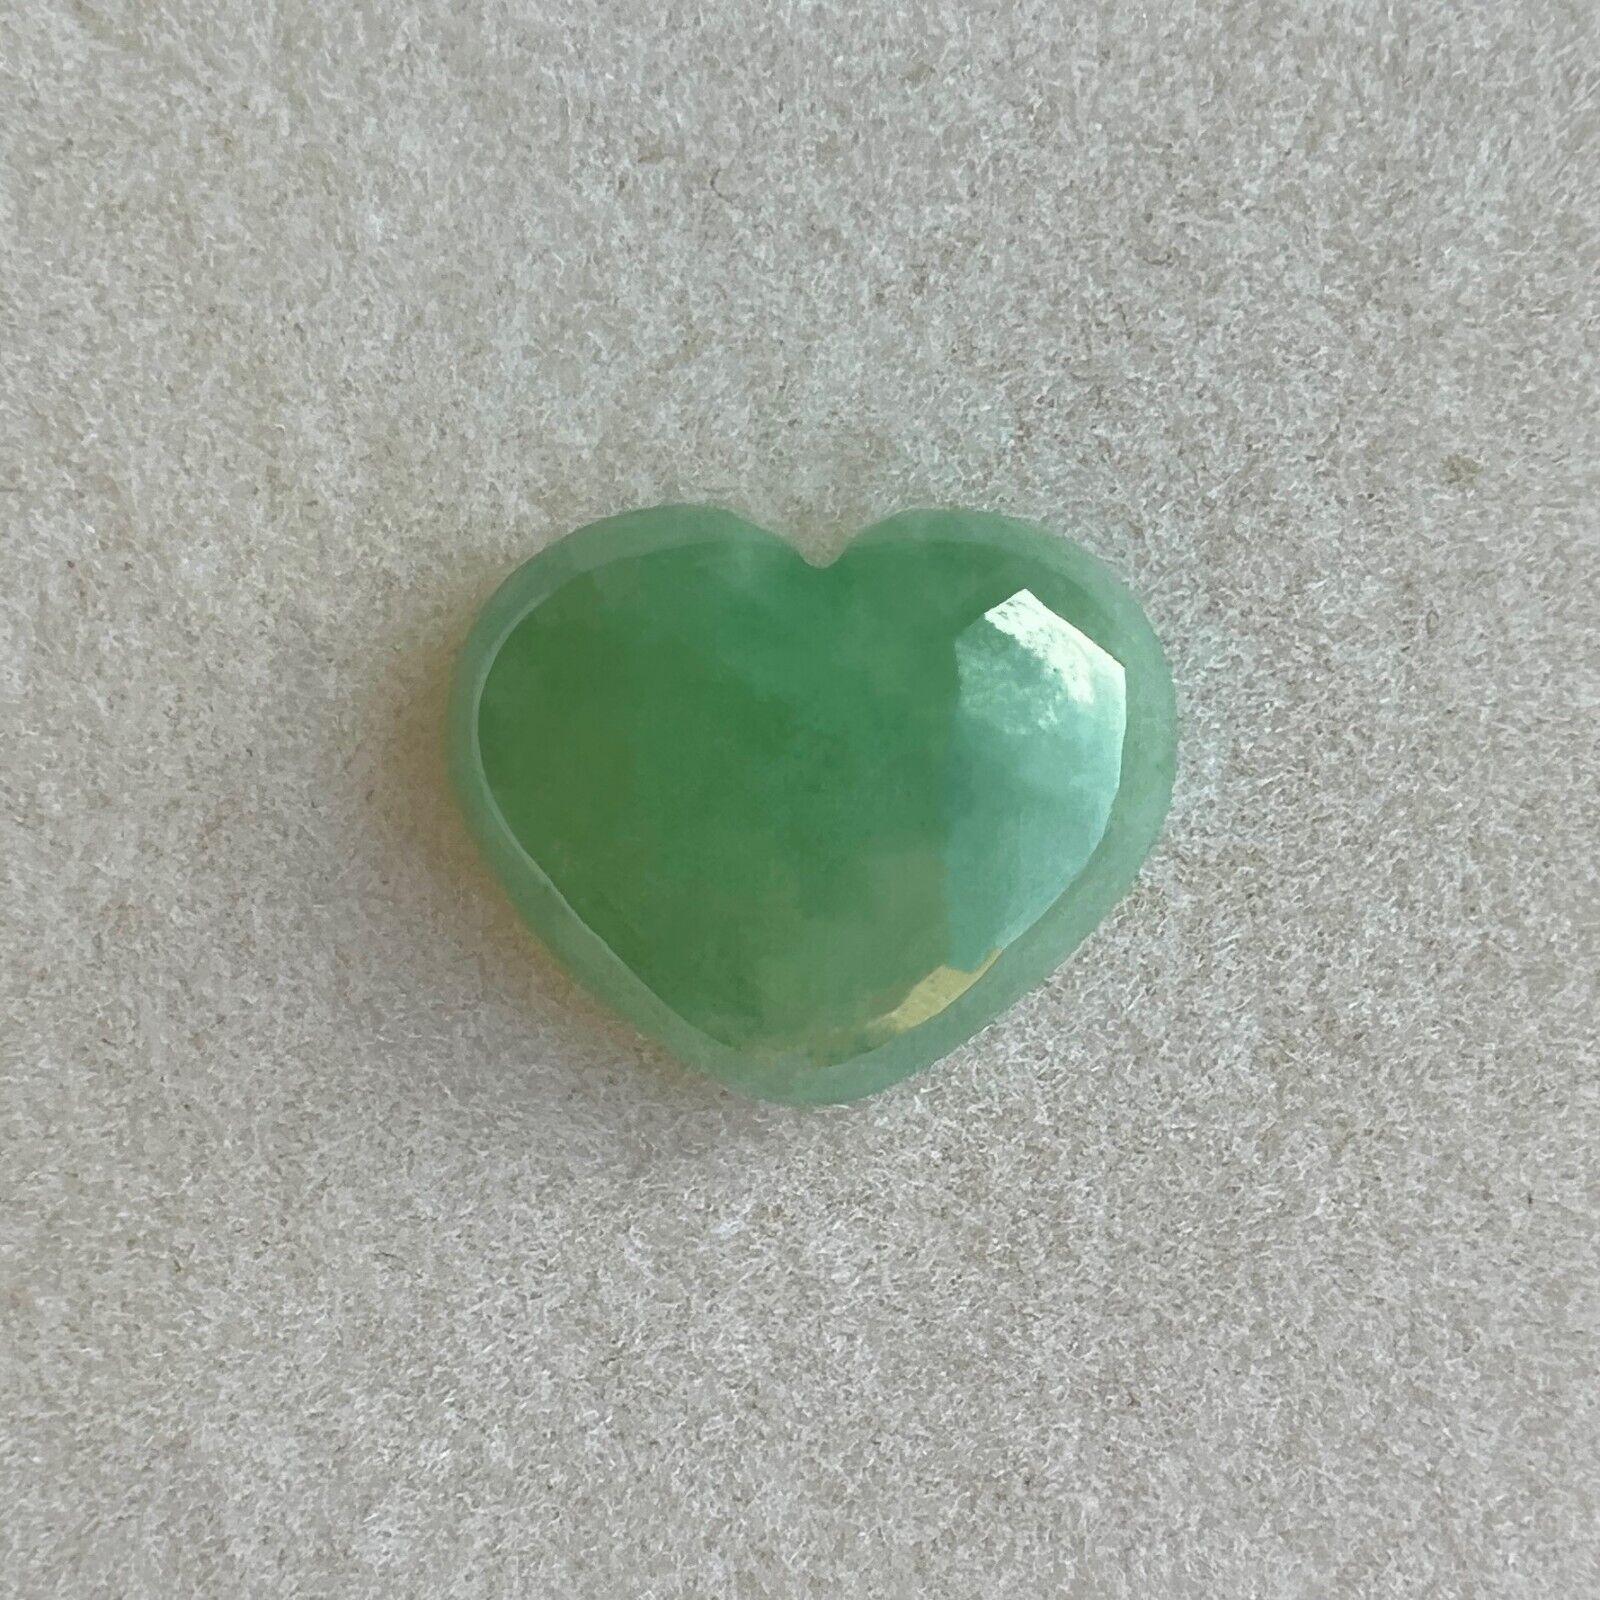 Natural 6.03ct IGI Certified Green Jade ‘A’ Grade Heart Cabochon Loose Gem

IGI Certified Untreated A Grade Green Jadeite Gemstone.
6.03 Carat with an excellent heart cabochon cut and bright green colour. Fully certified by IGI in Antwerp confirming